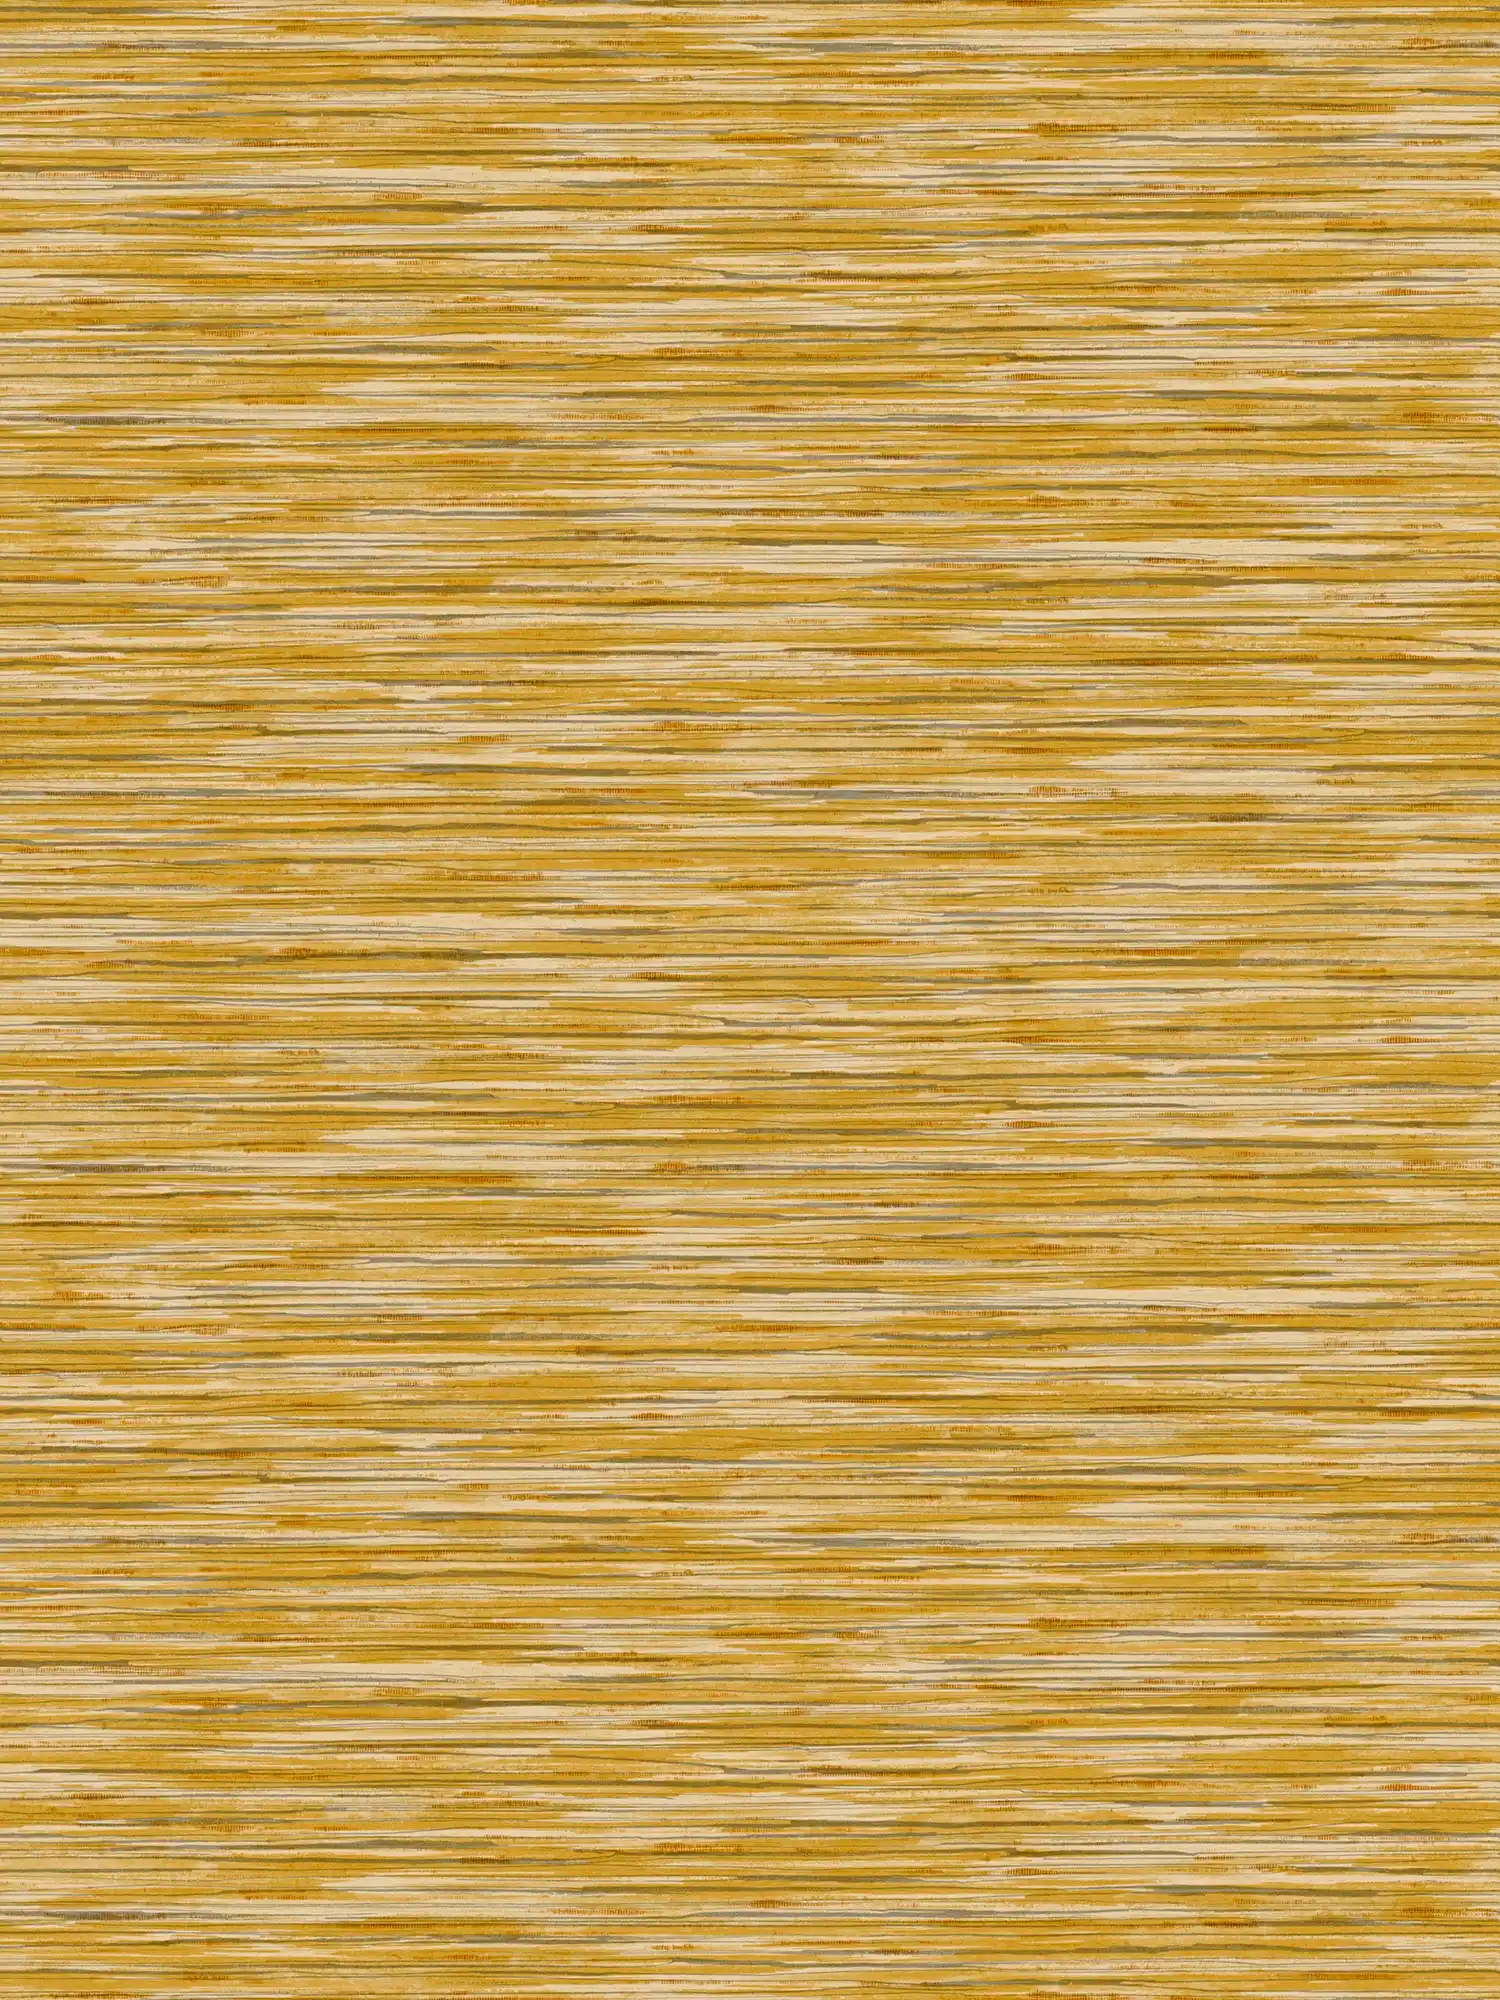 Mottled pattern wallpaper with natural colour hatching - yellow
